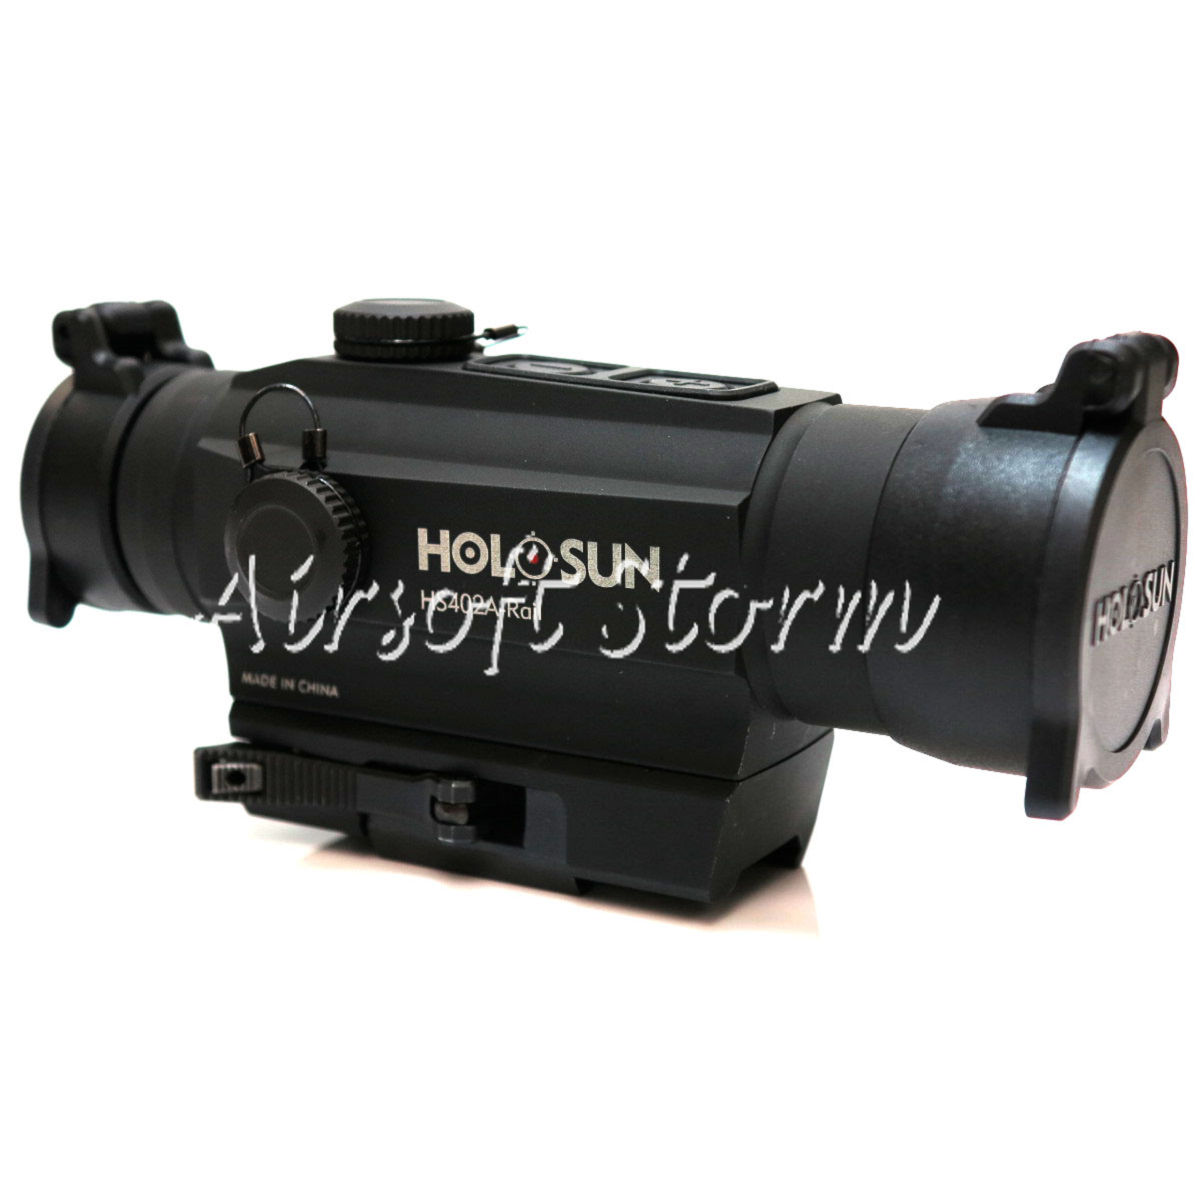 SWAT Gear Tactical Holosun HS402A-Rail 1x30 Red Dot Sight Scope with Side Rail